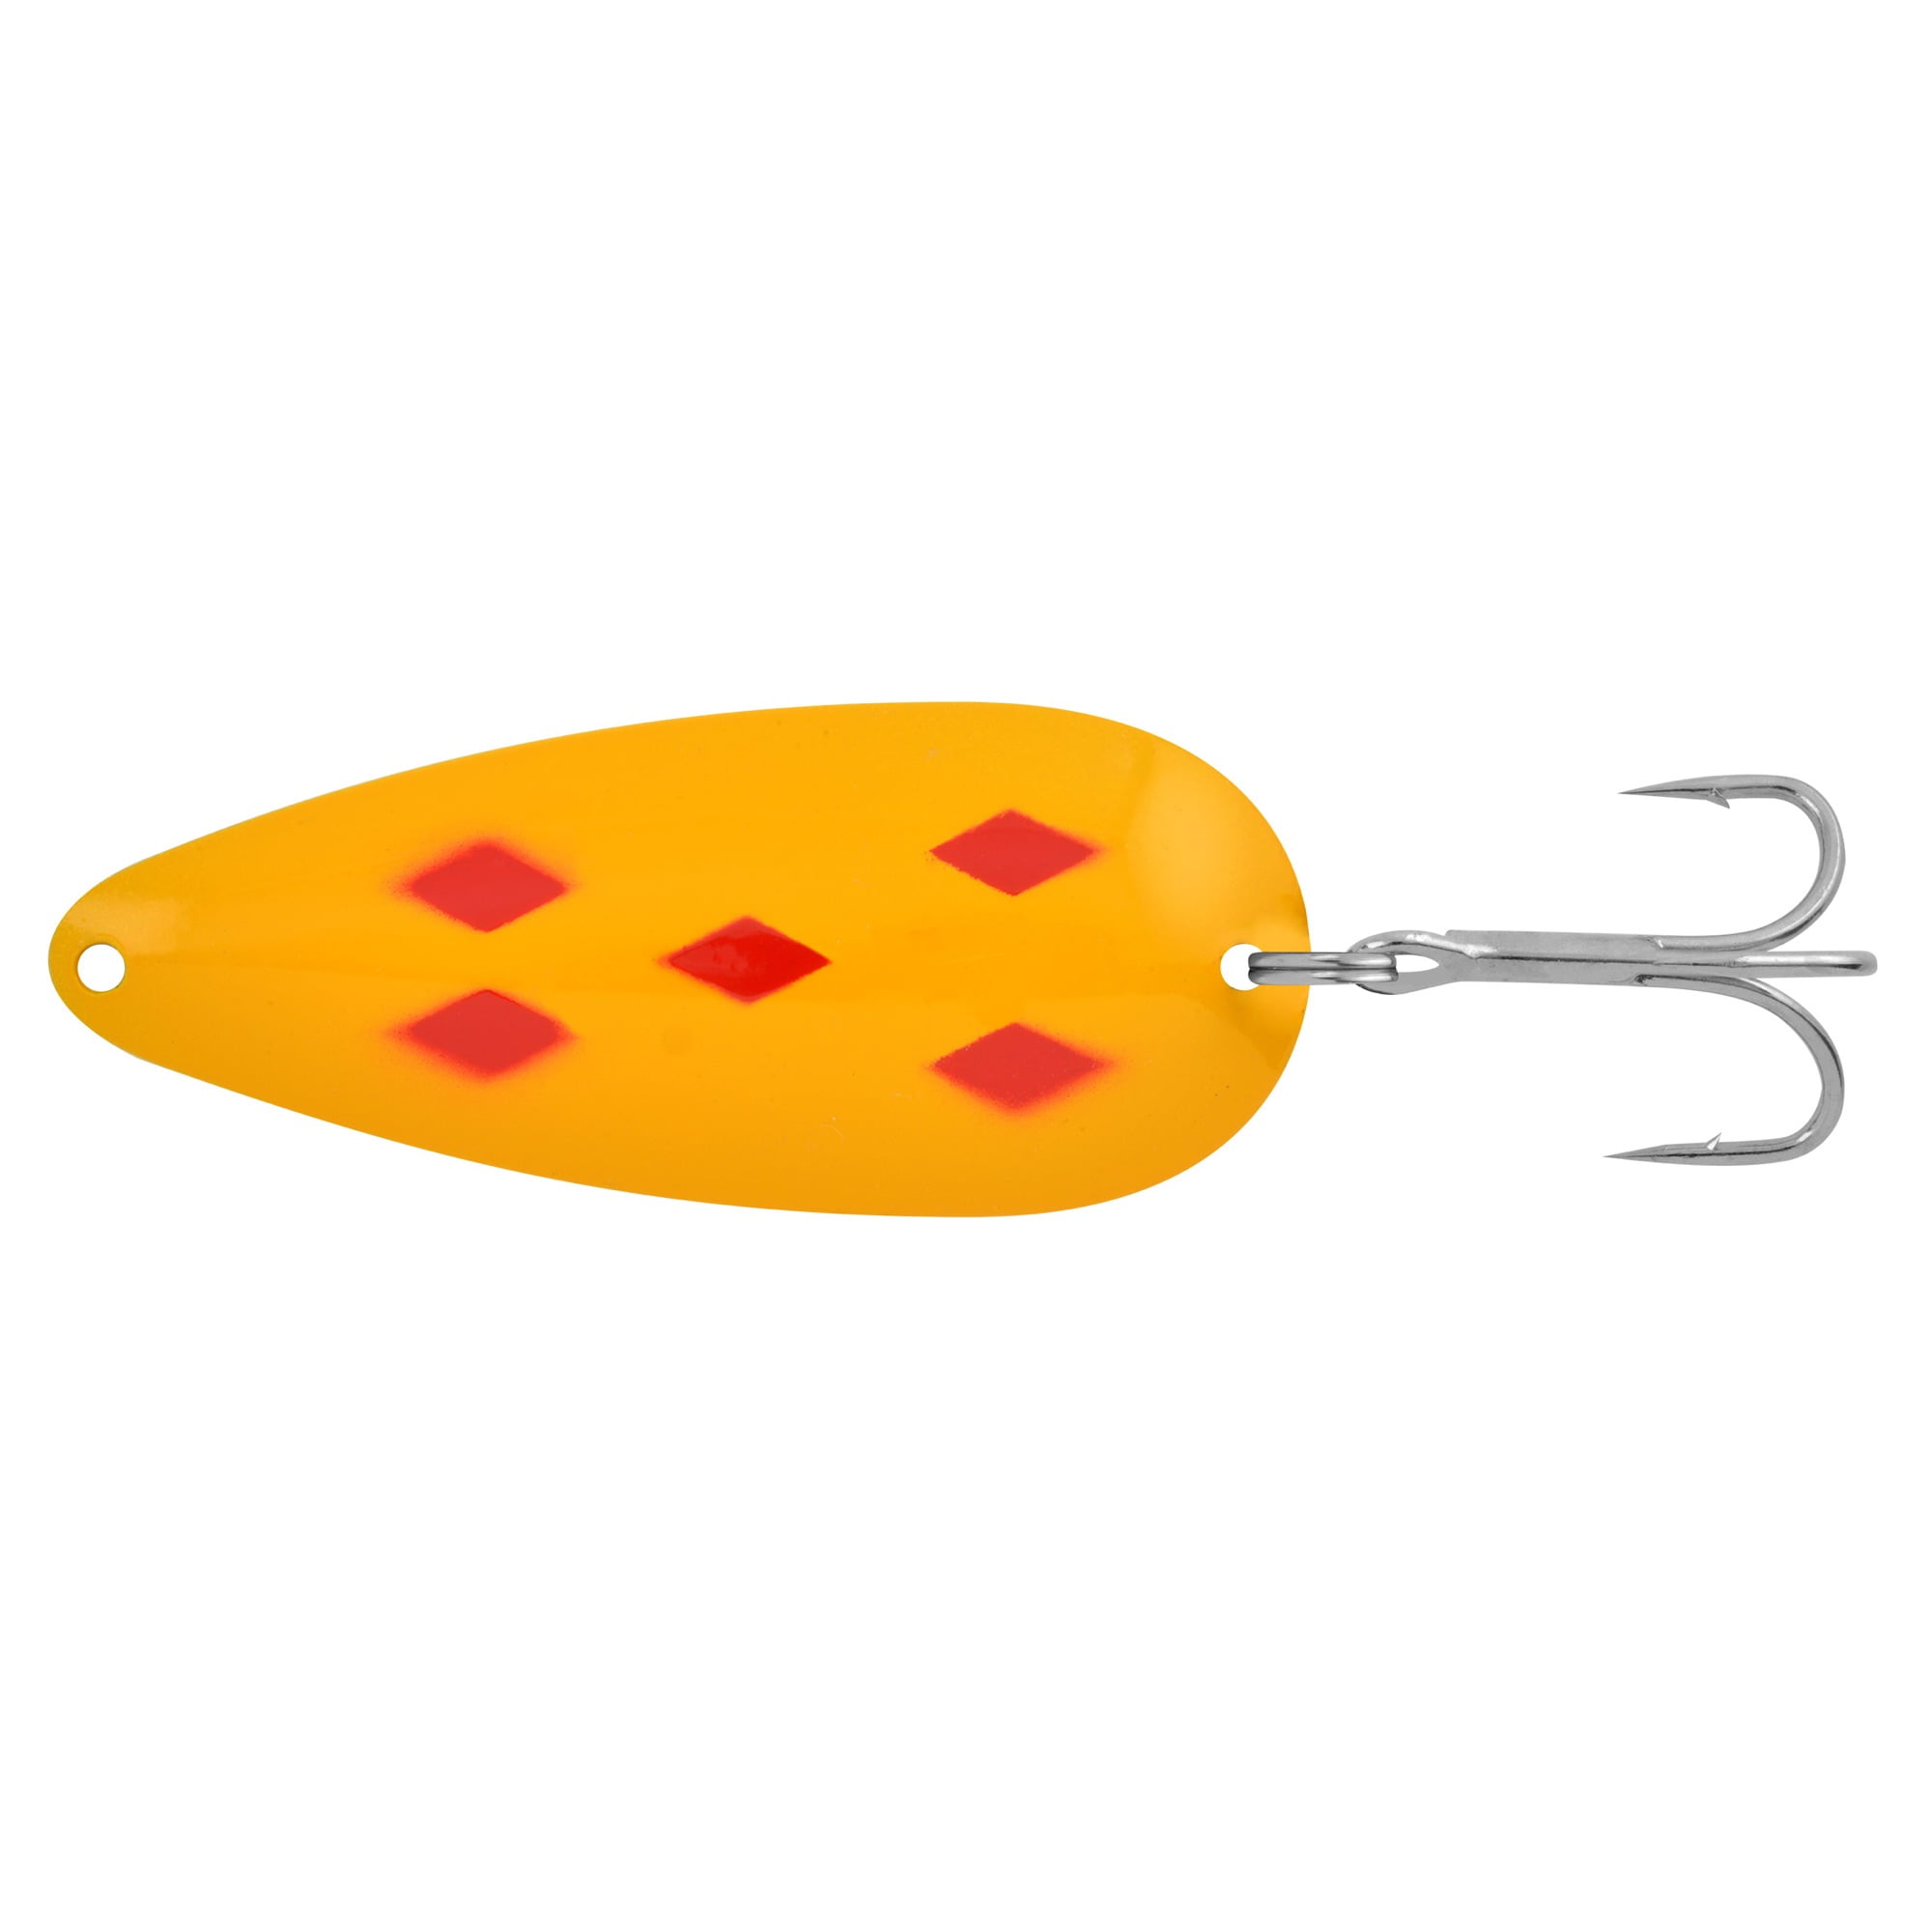 Apex Tackle Gamefish Spoon Red/White 5/8 oz., Fishing Spoons 